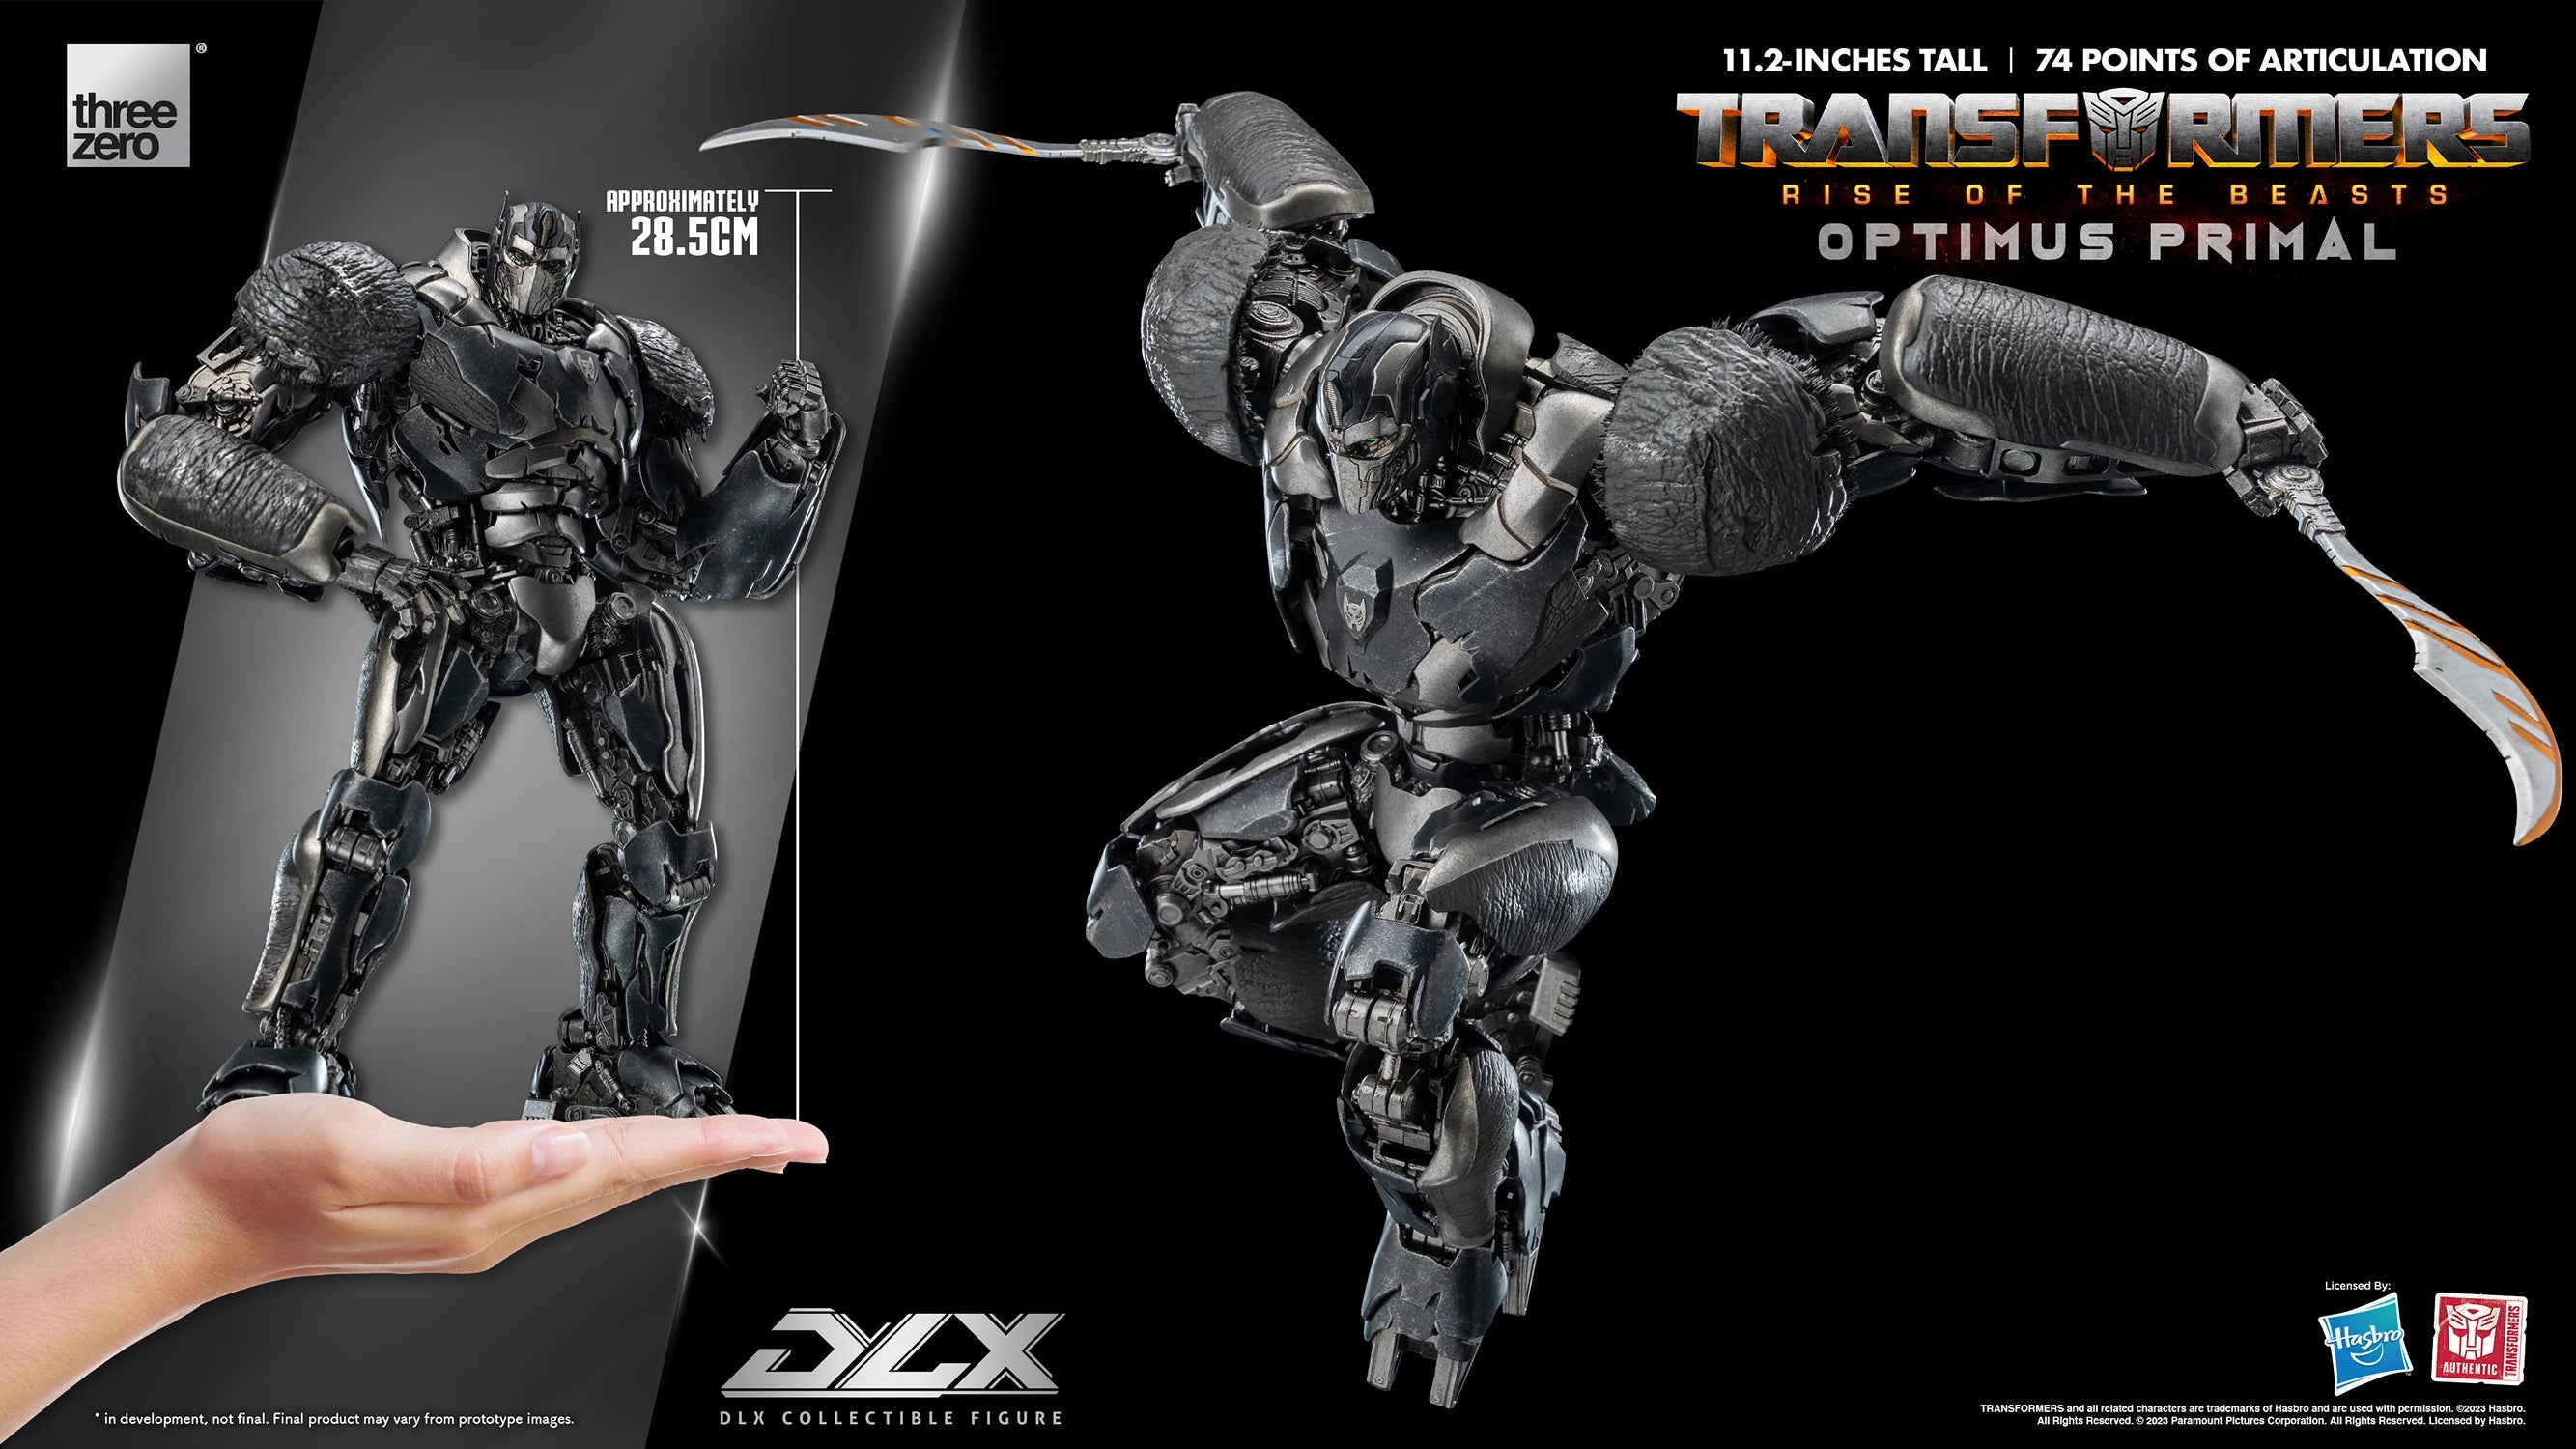 Threezero Collectible Figure: Transformers Rise Of the Beasts - Optimus Primal DLX